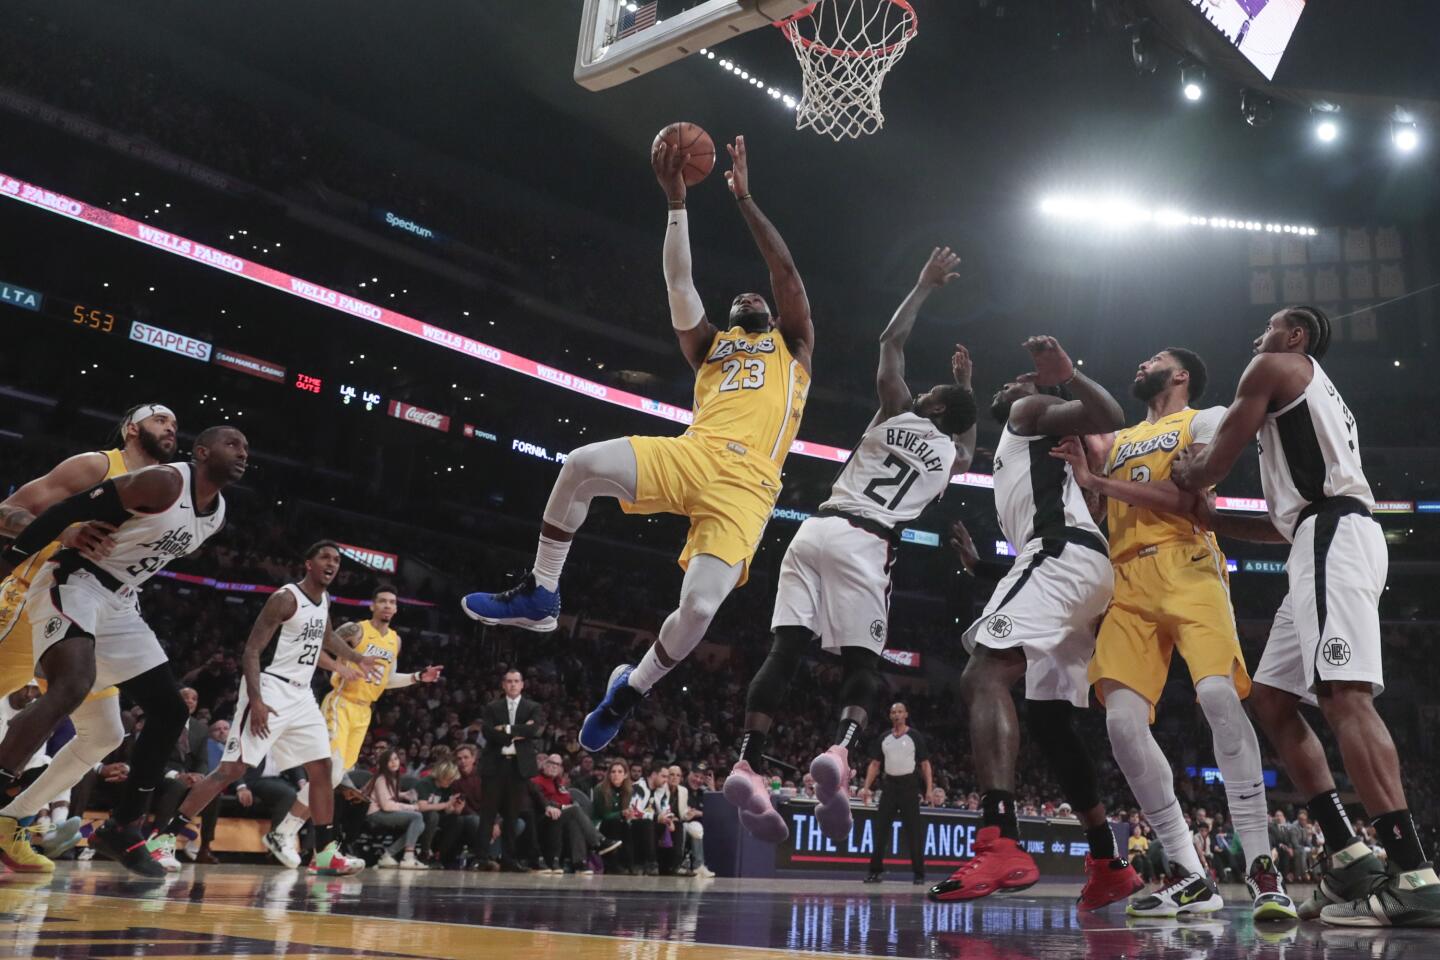 Lakers forward LeBron James drives to the basket for a layup against the Clippers in the first half.